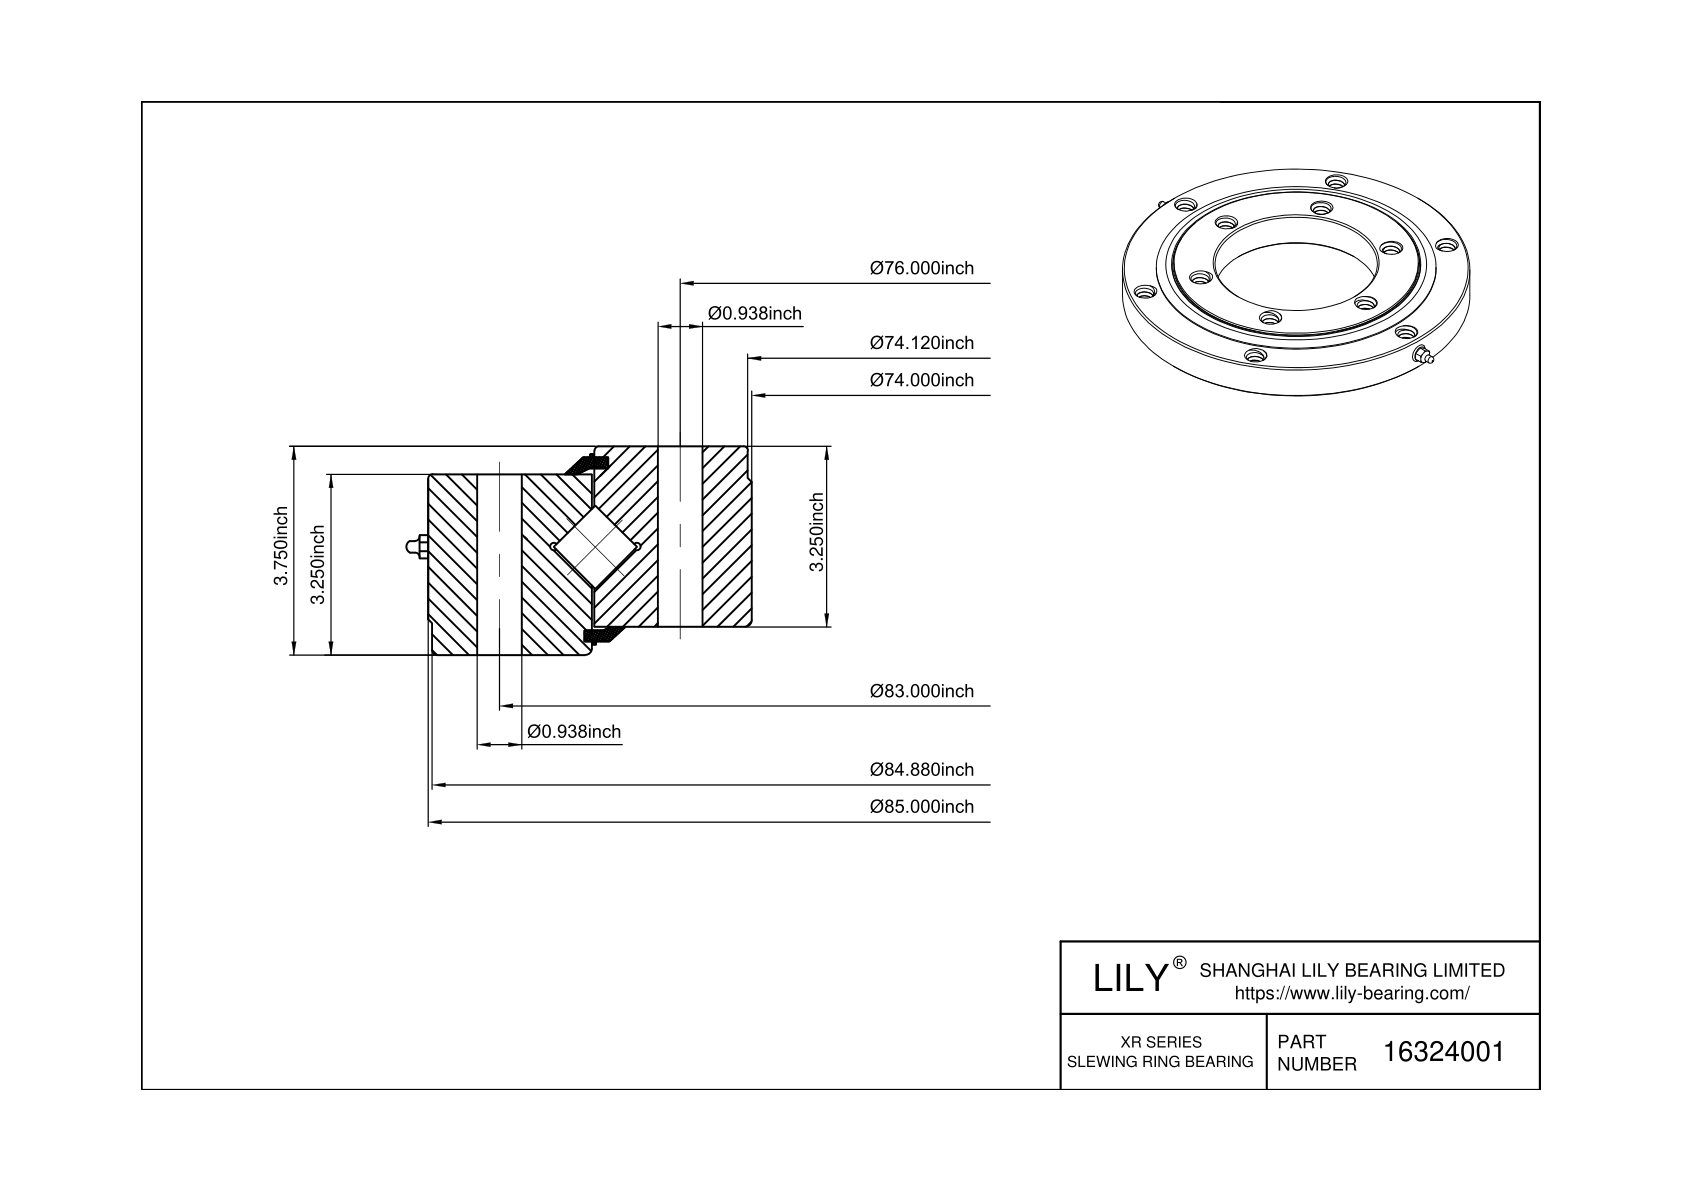 16324001 Cross Roller Slewing Ring Bearing cad drawing